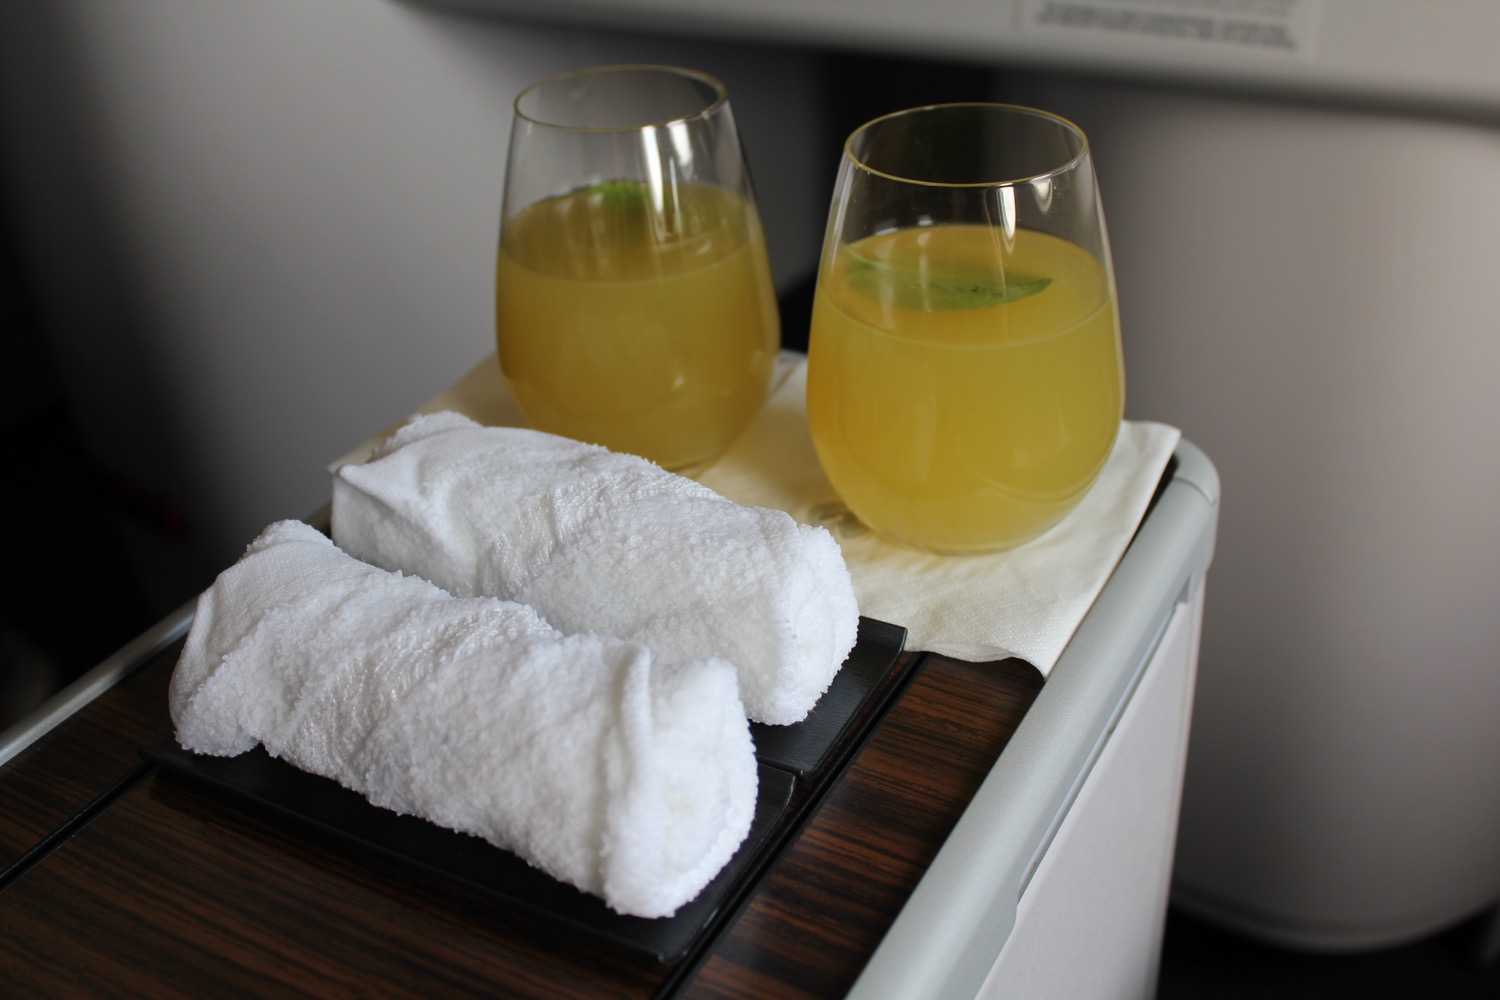 two glasses of orange liquid and towels on a tray